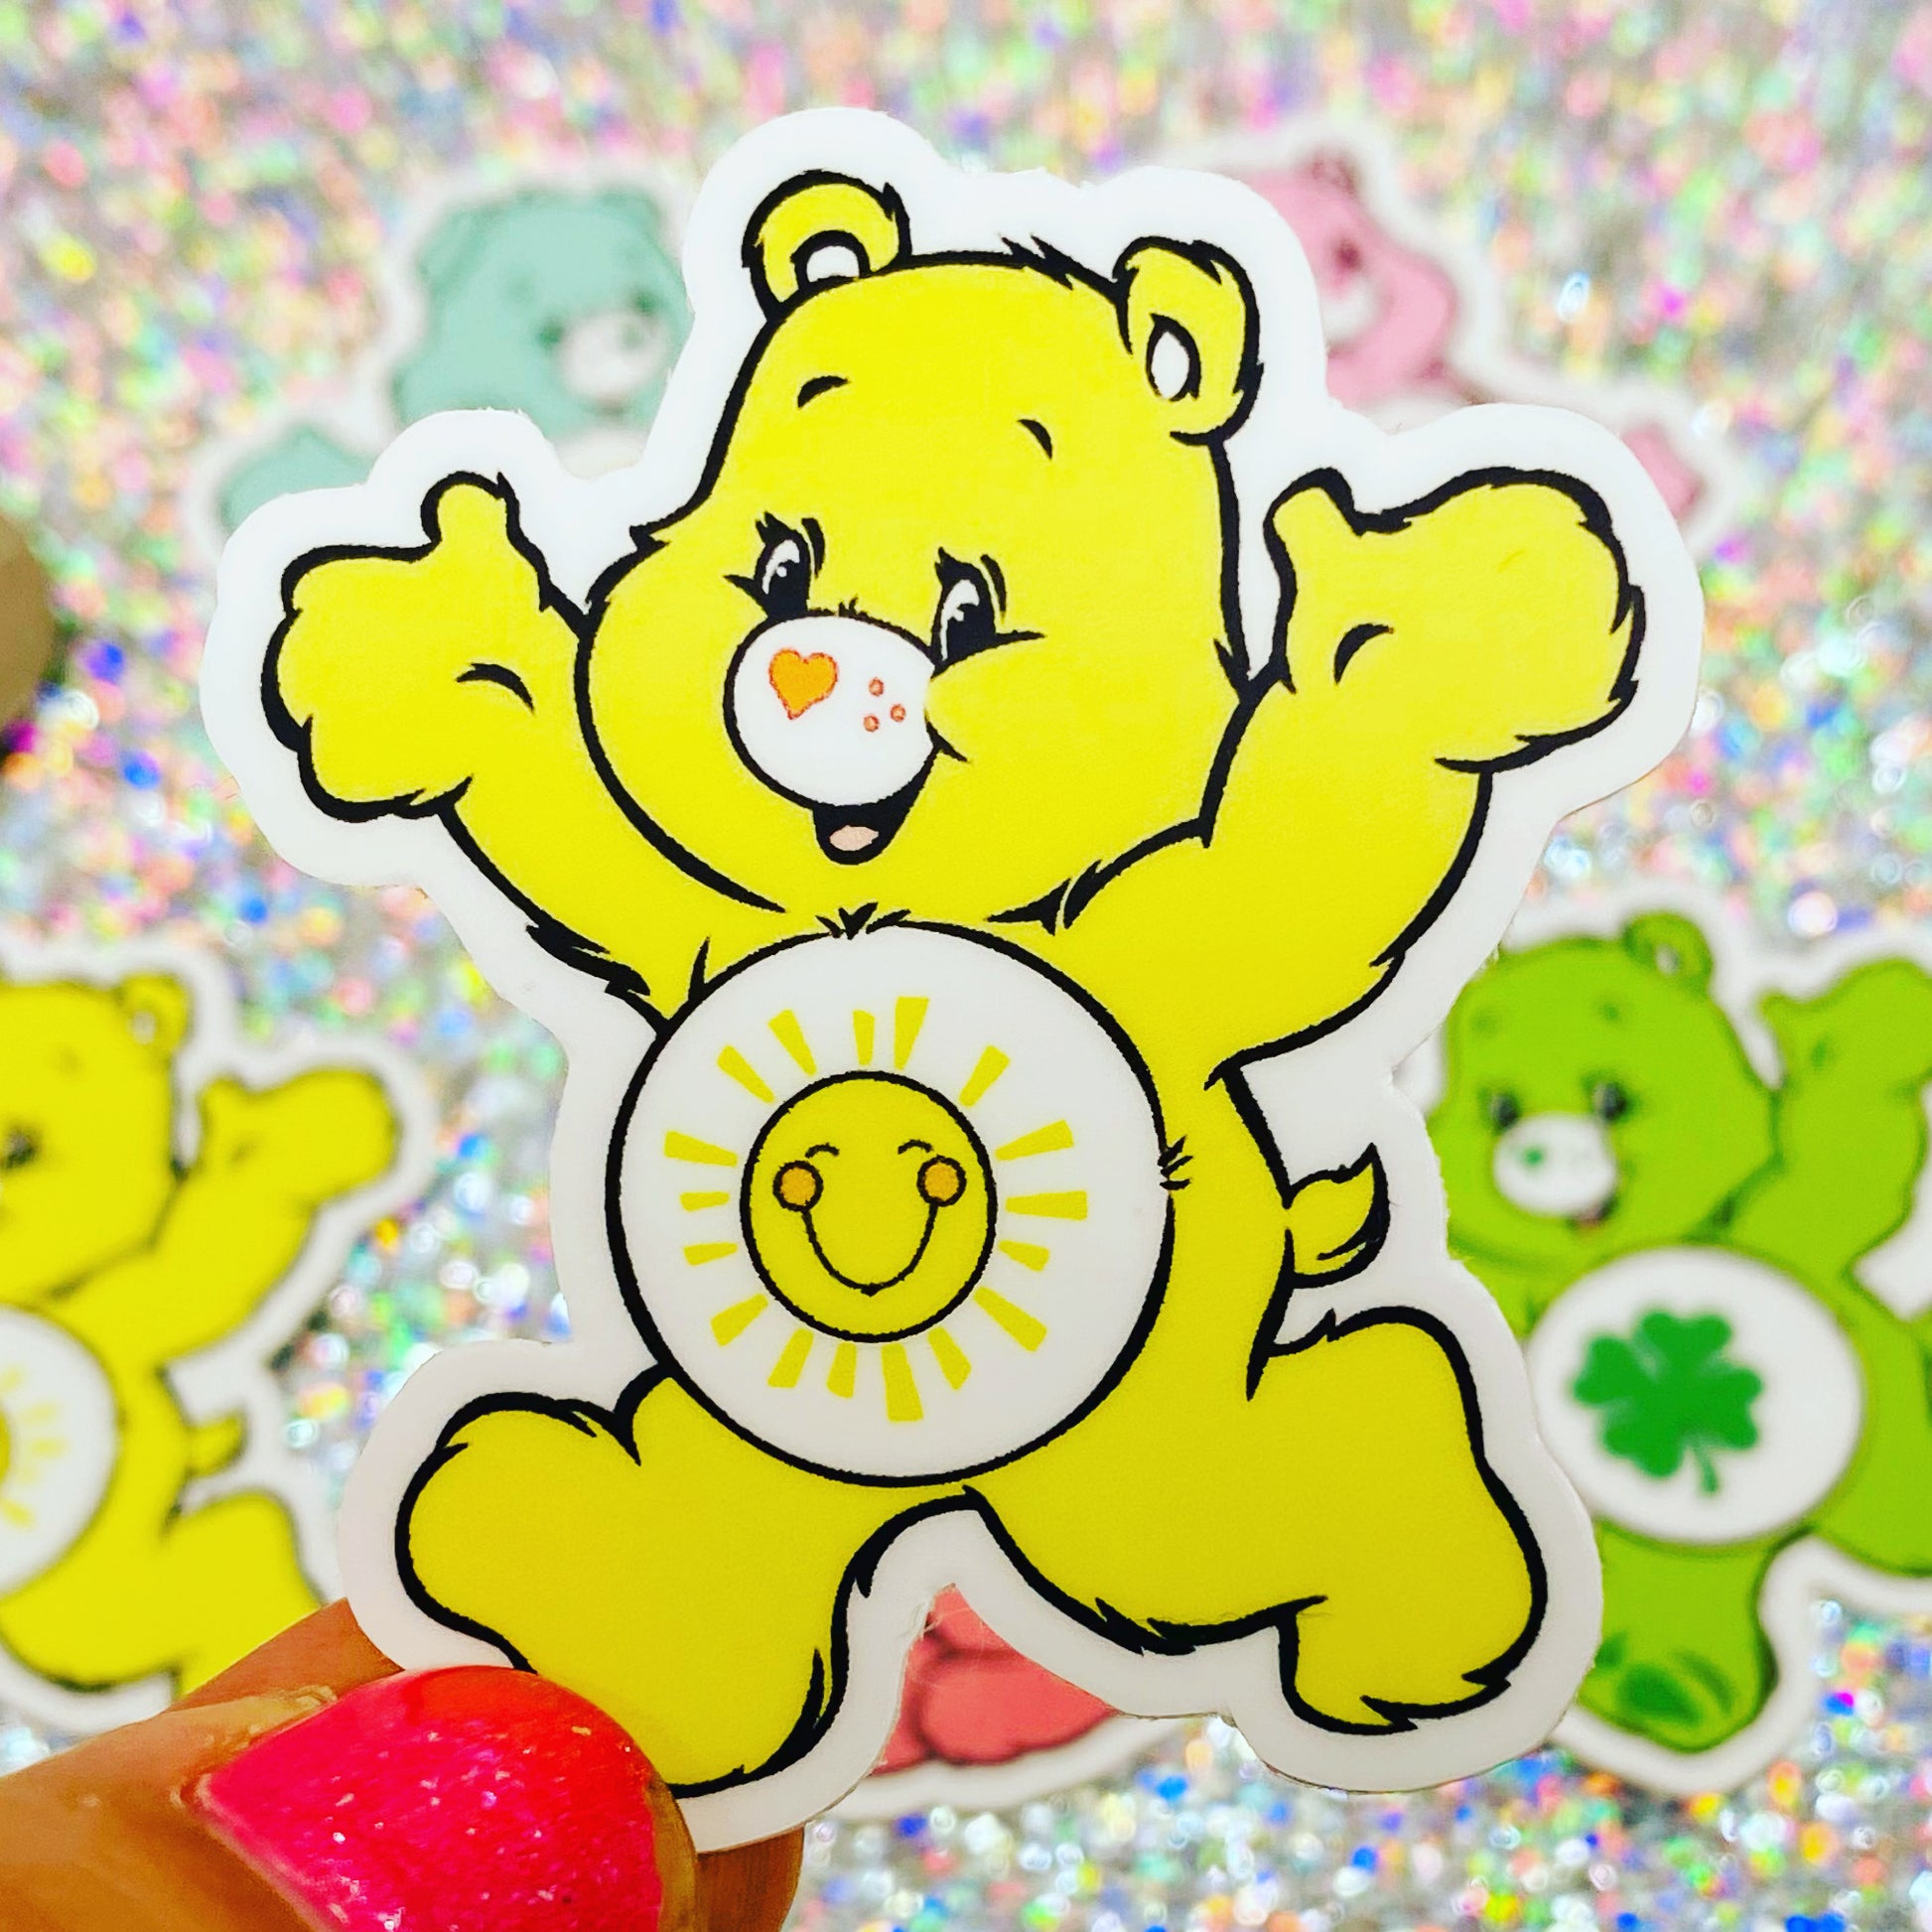 Wish Bear Care Bear Stickers 80s retro vintage inspired carebears decals